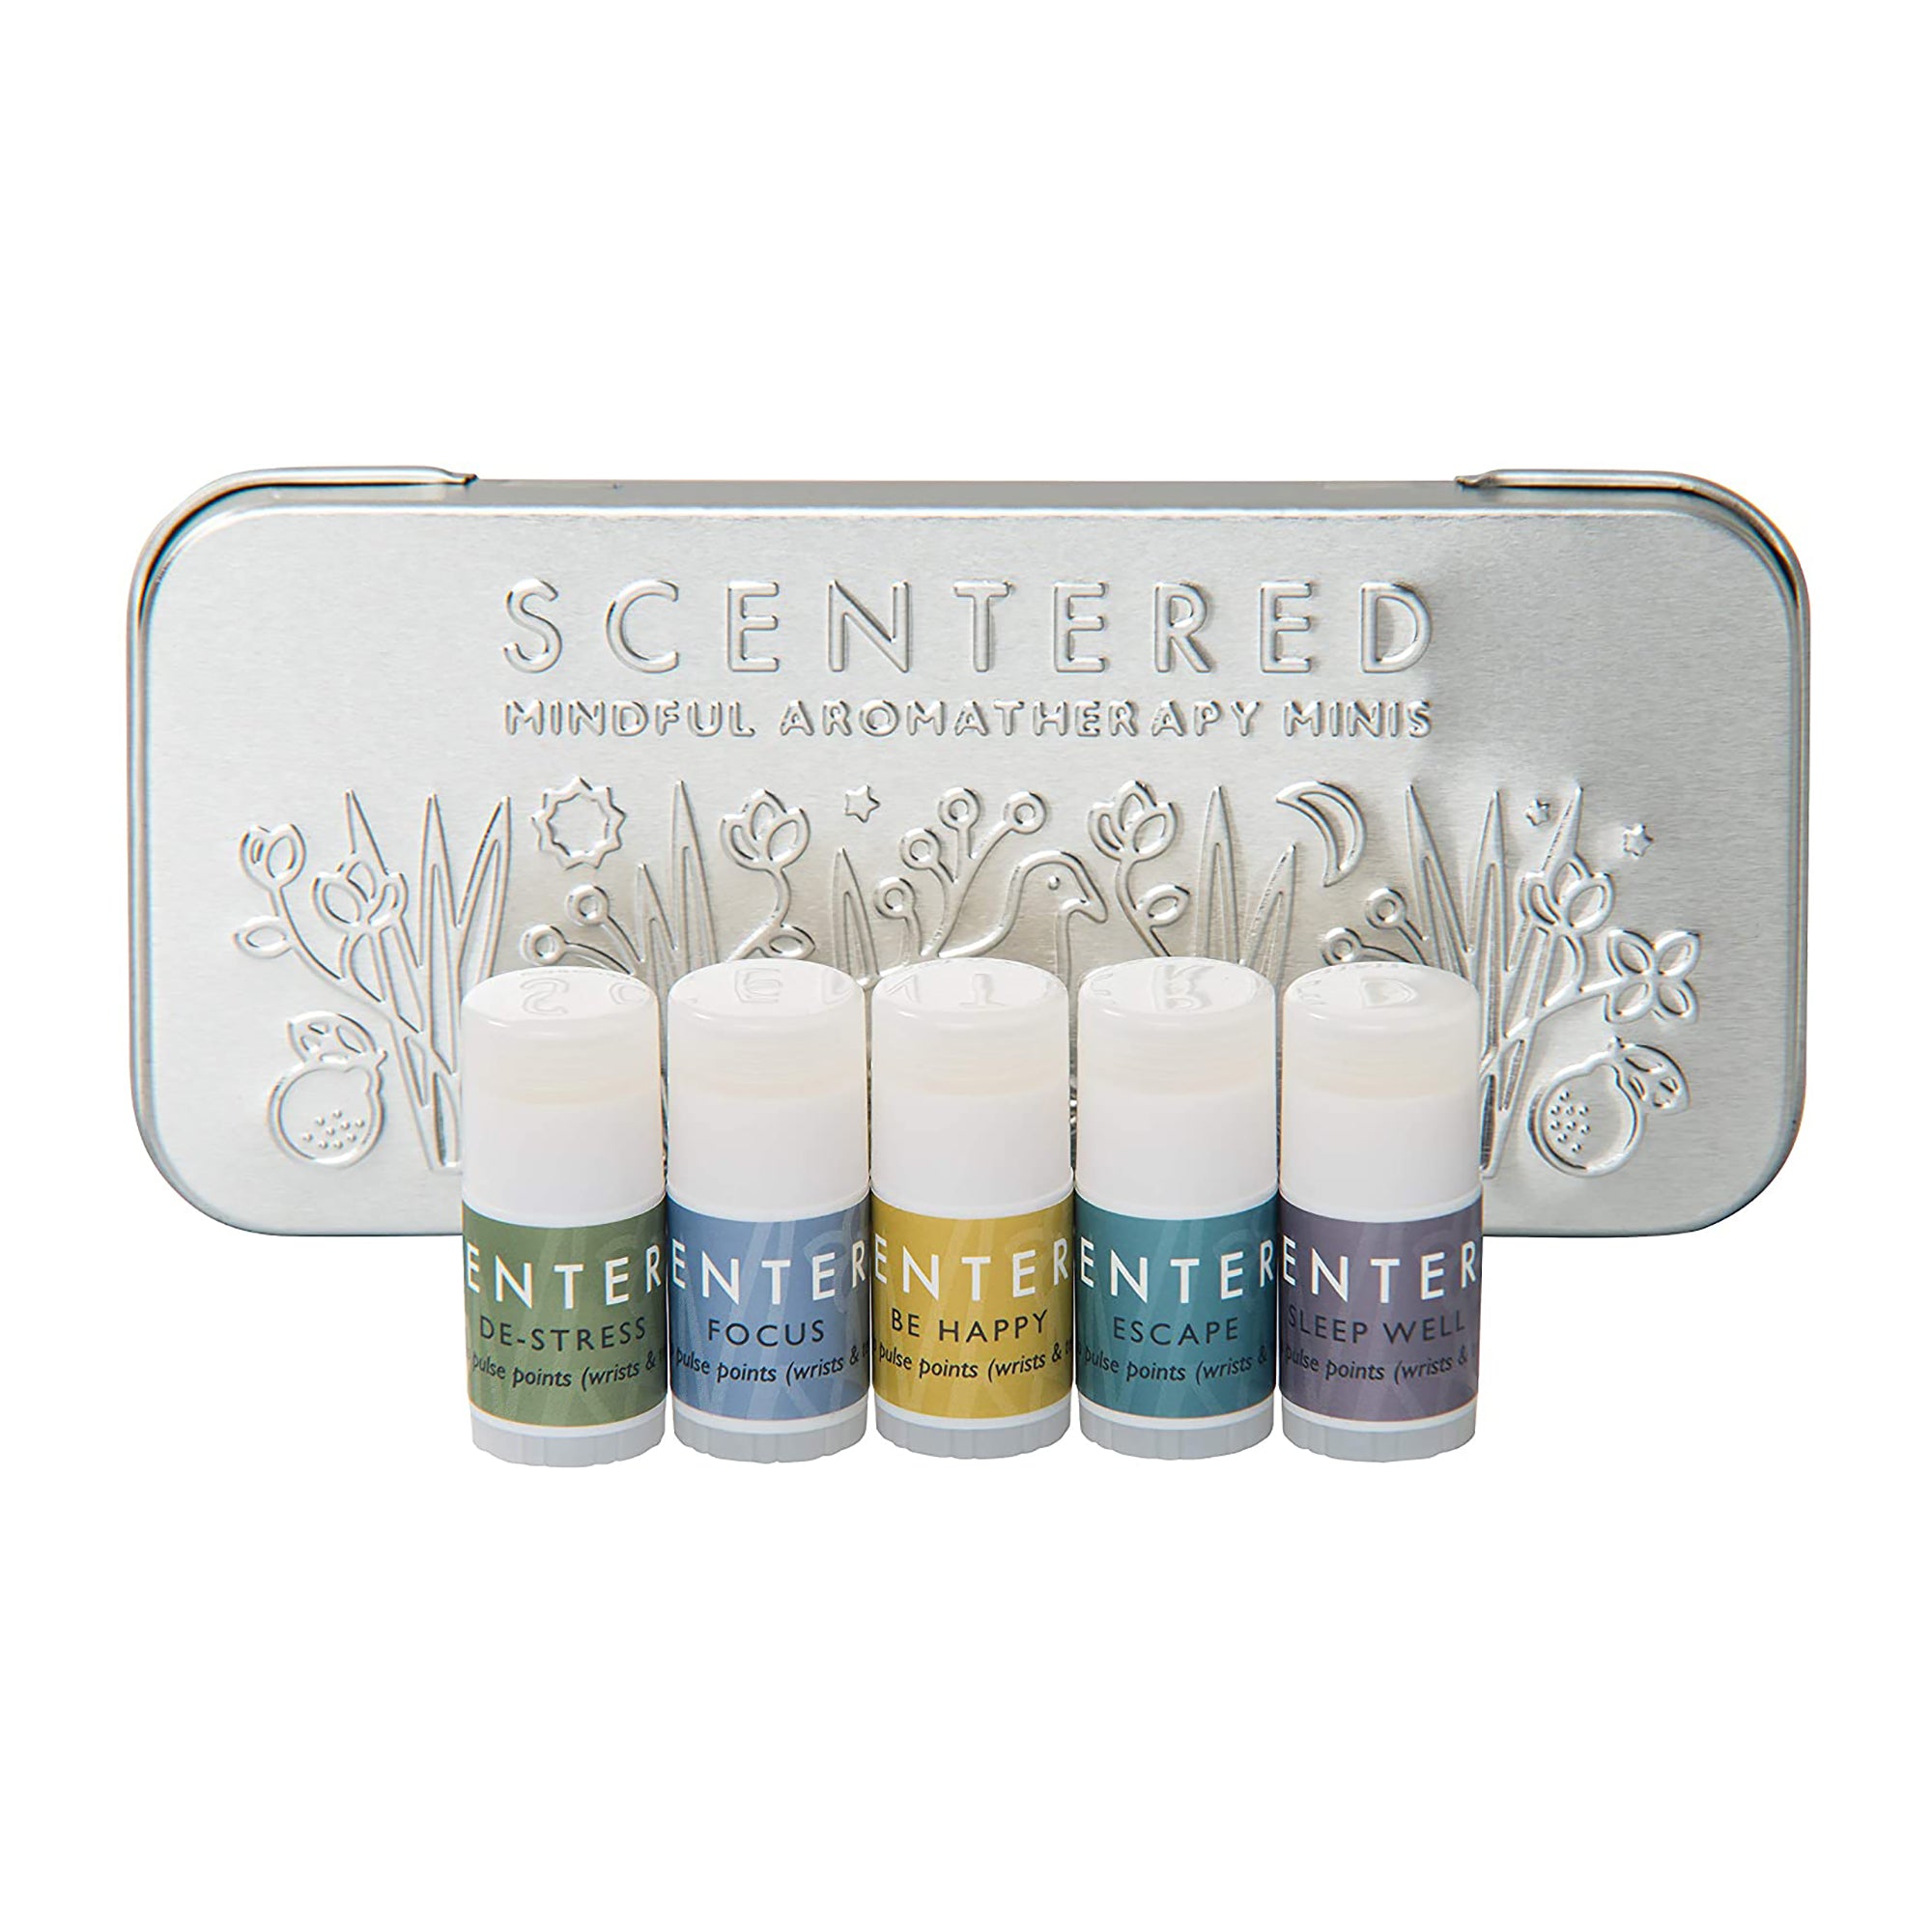 Scentered Aromatherapy Mindful Mini's Collection / KIT